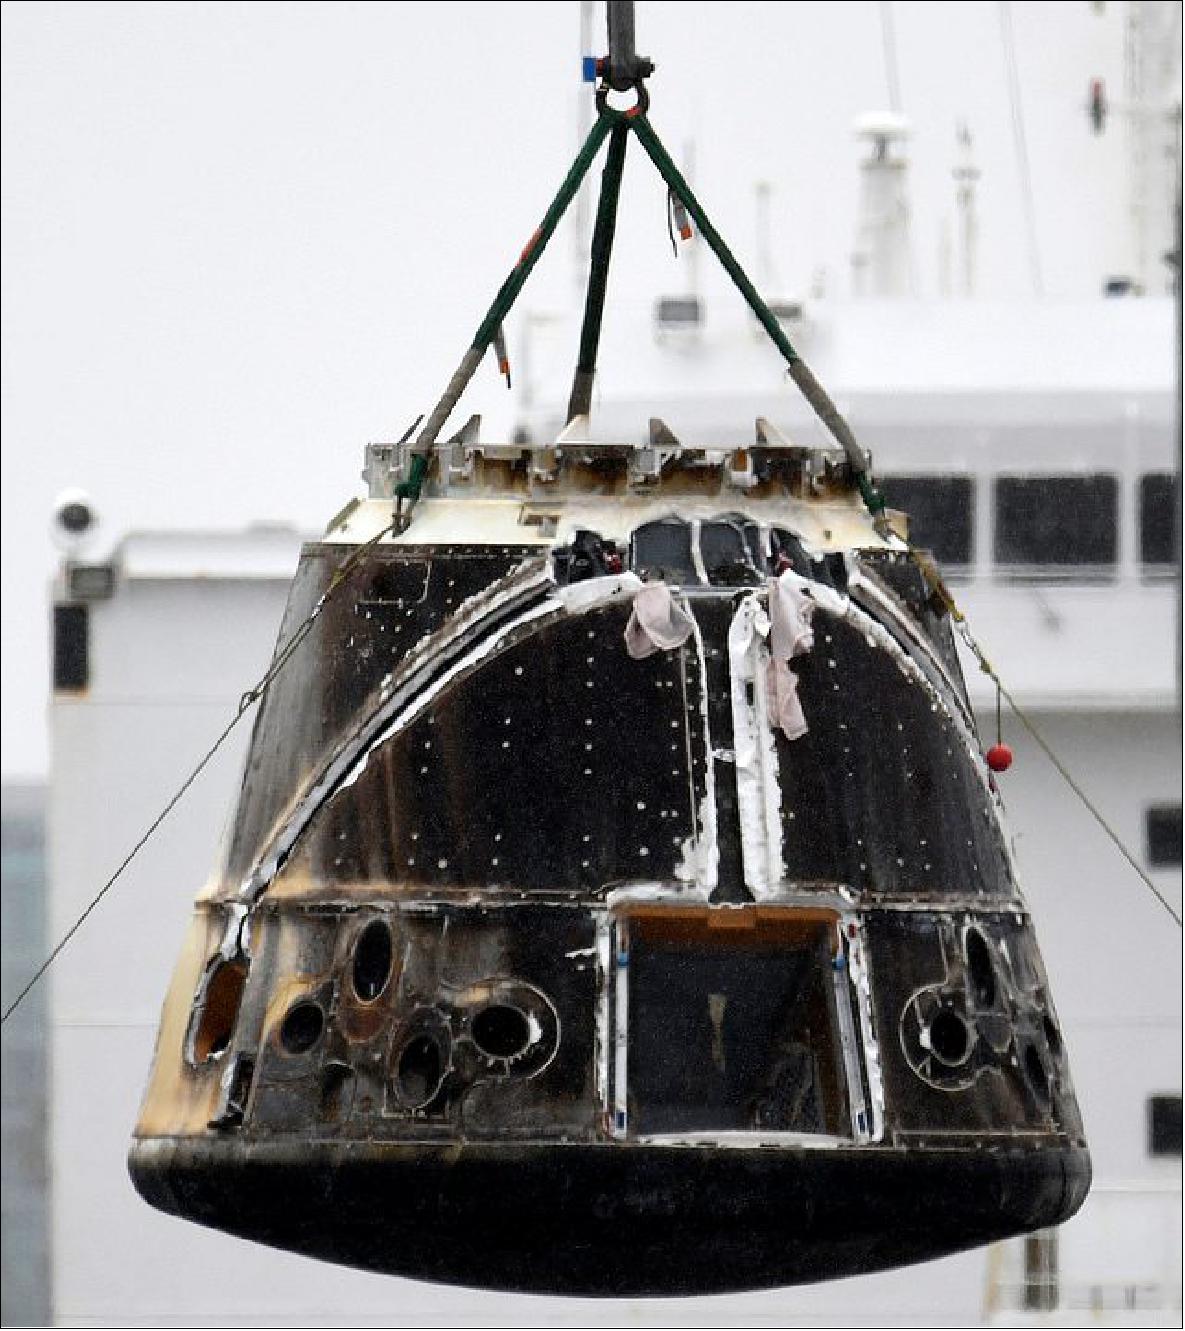 Figure 2: Photo of the recovered Dragon cargo capsule (photo credit: Gene Blevins/LA Daily News)